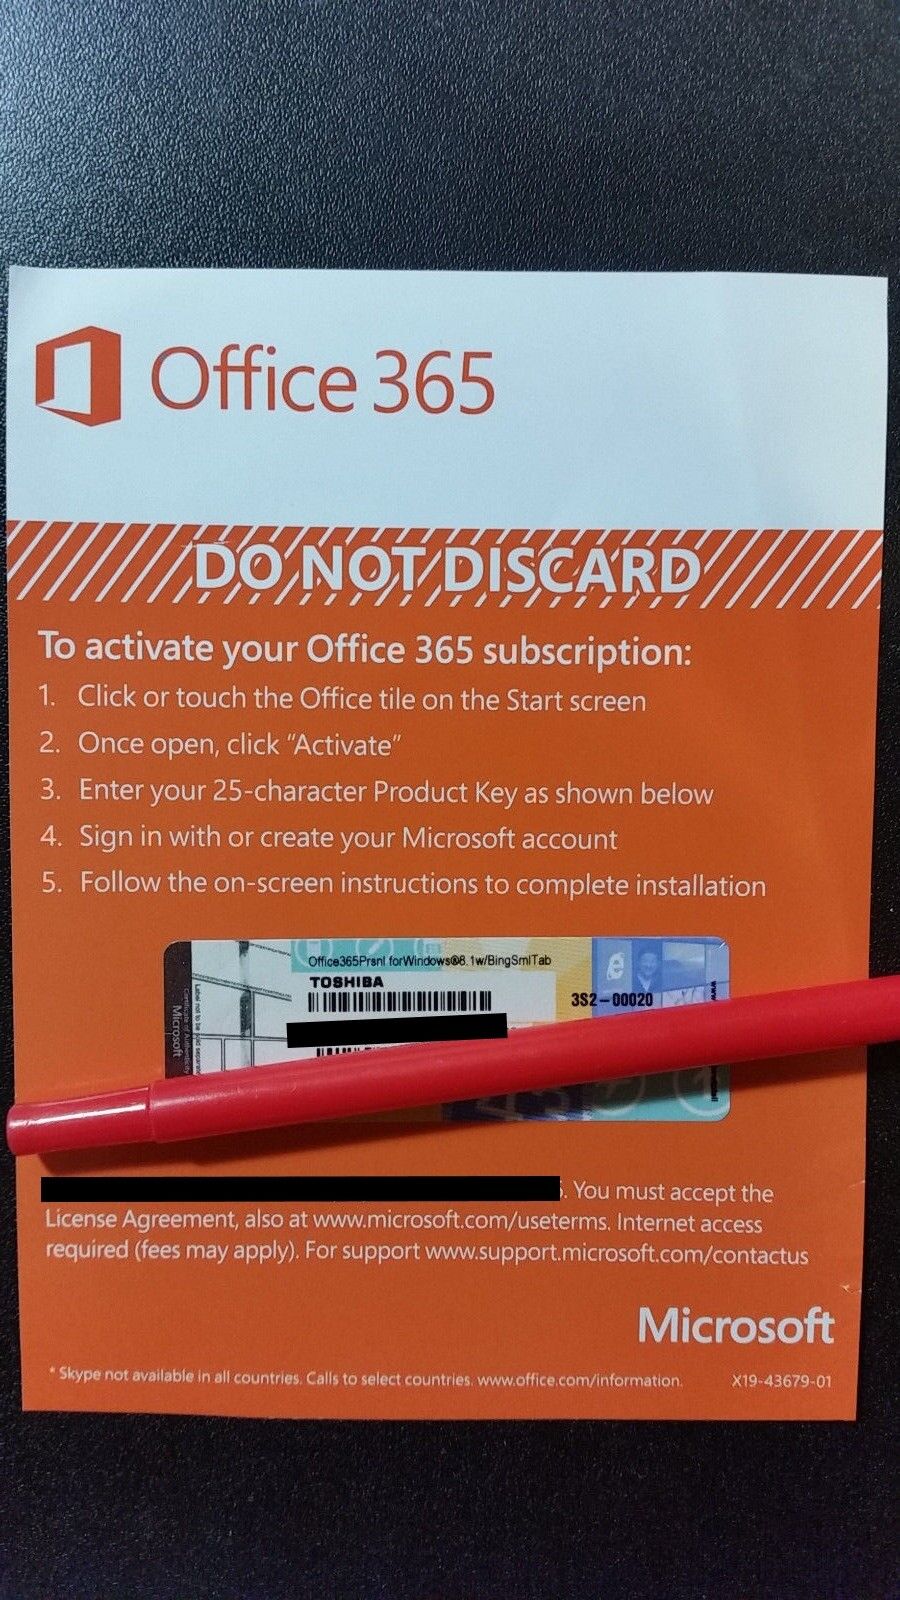 Microsoft Office 365 Personal 1 Year Subscription of Latest MS OFFICE +1TB CLOUD